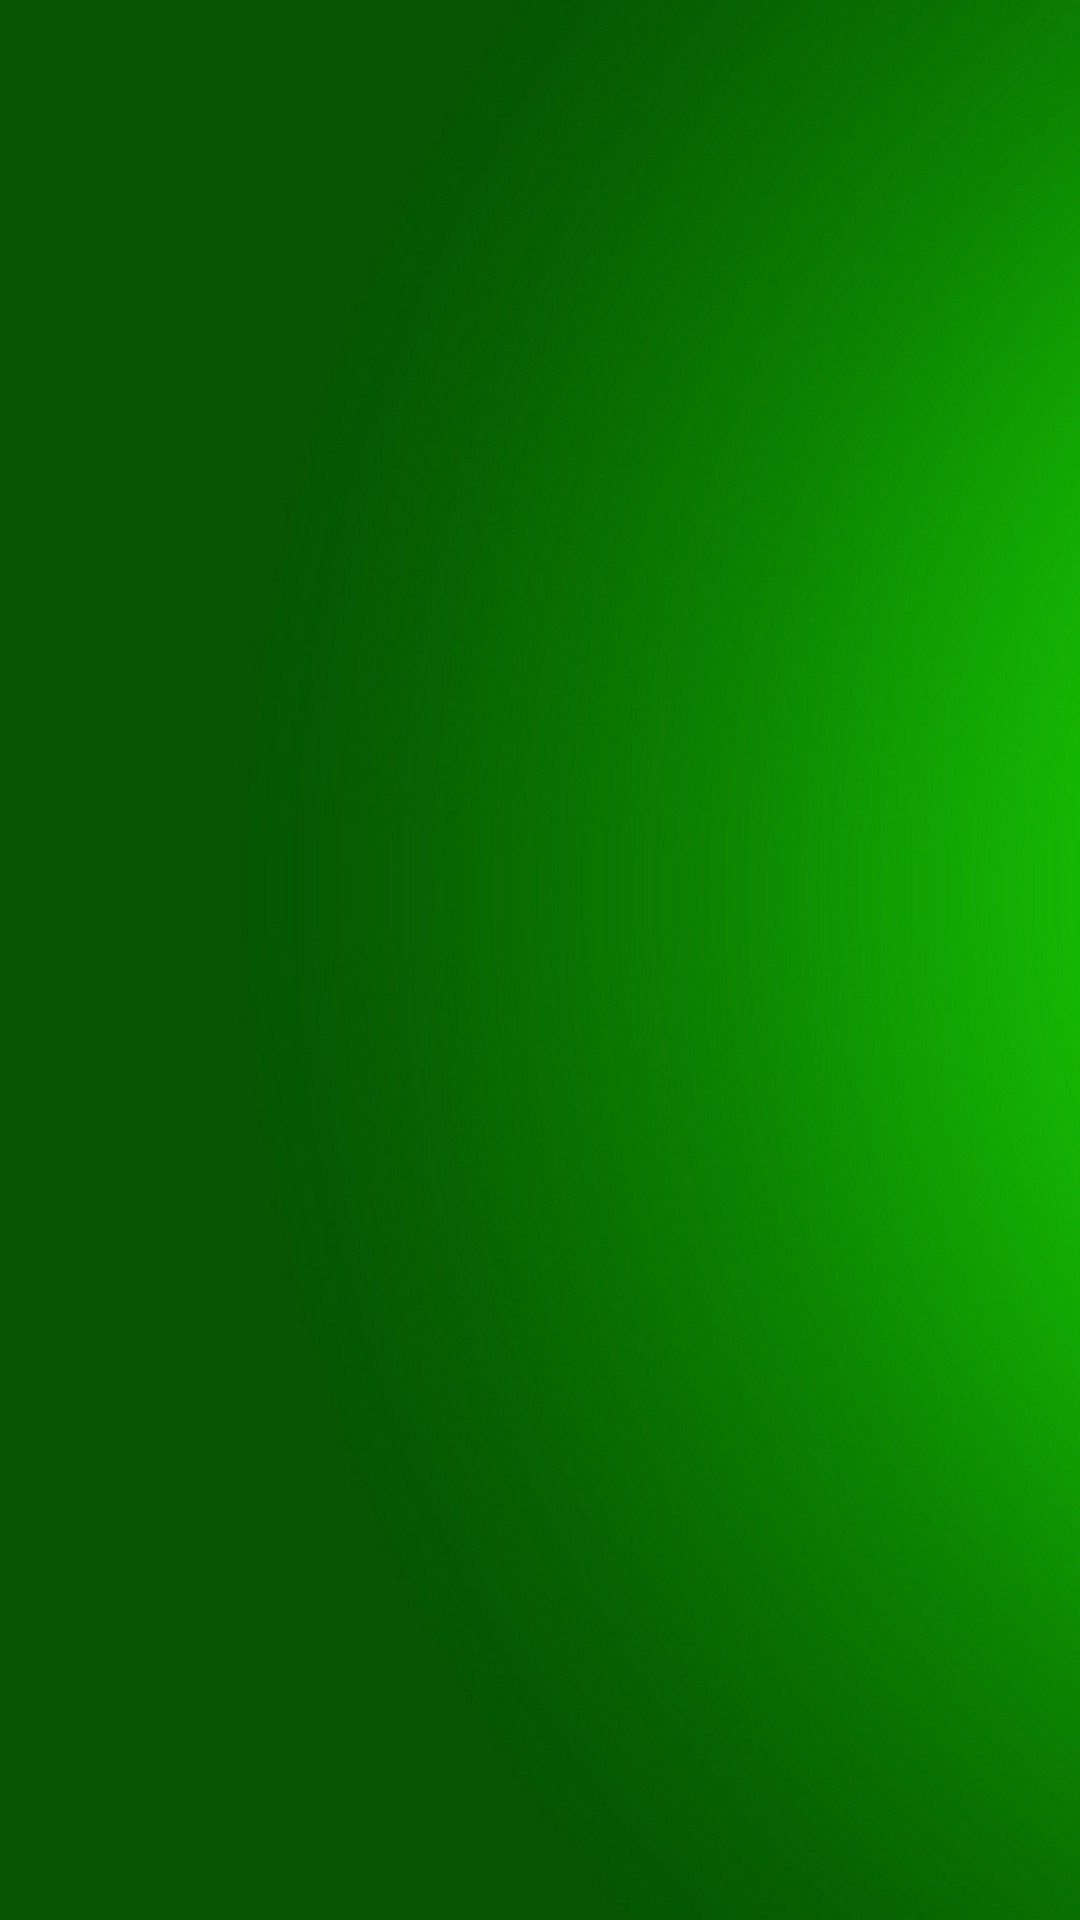 Green Phone Wallpaper with high-resolution 1080x1920 pixel. Download all Mobile Wallpapers and Use them as wallpapers for your iPhone, Tablet, iPad, Android and other mobile devices